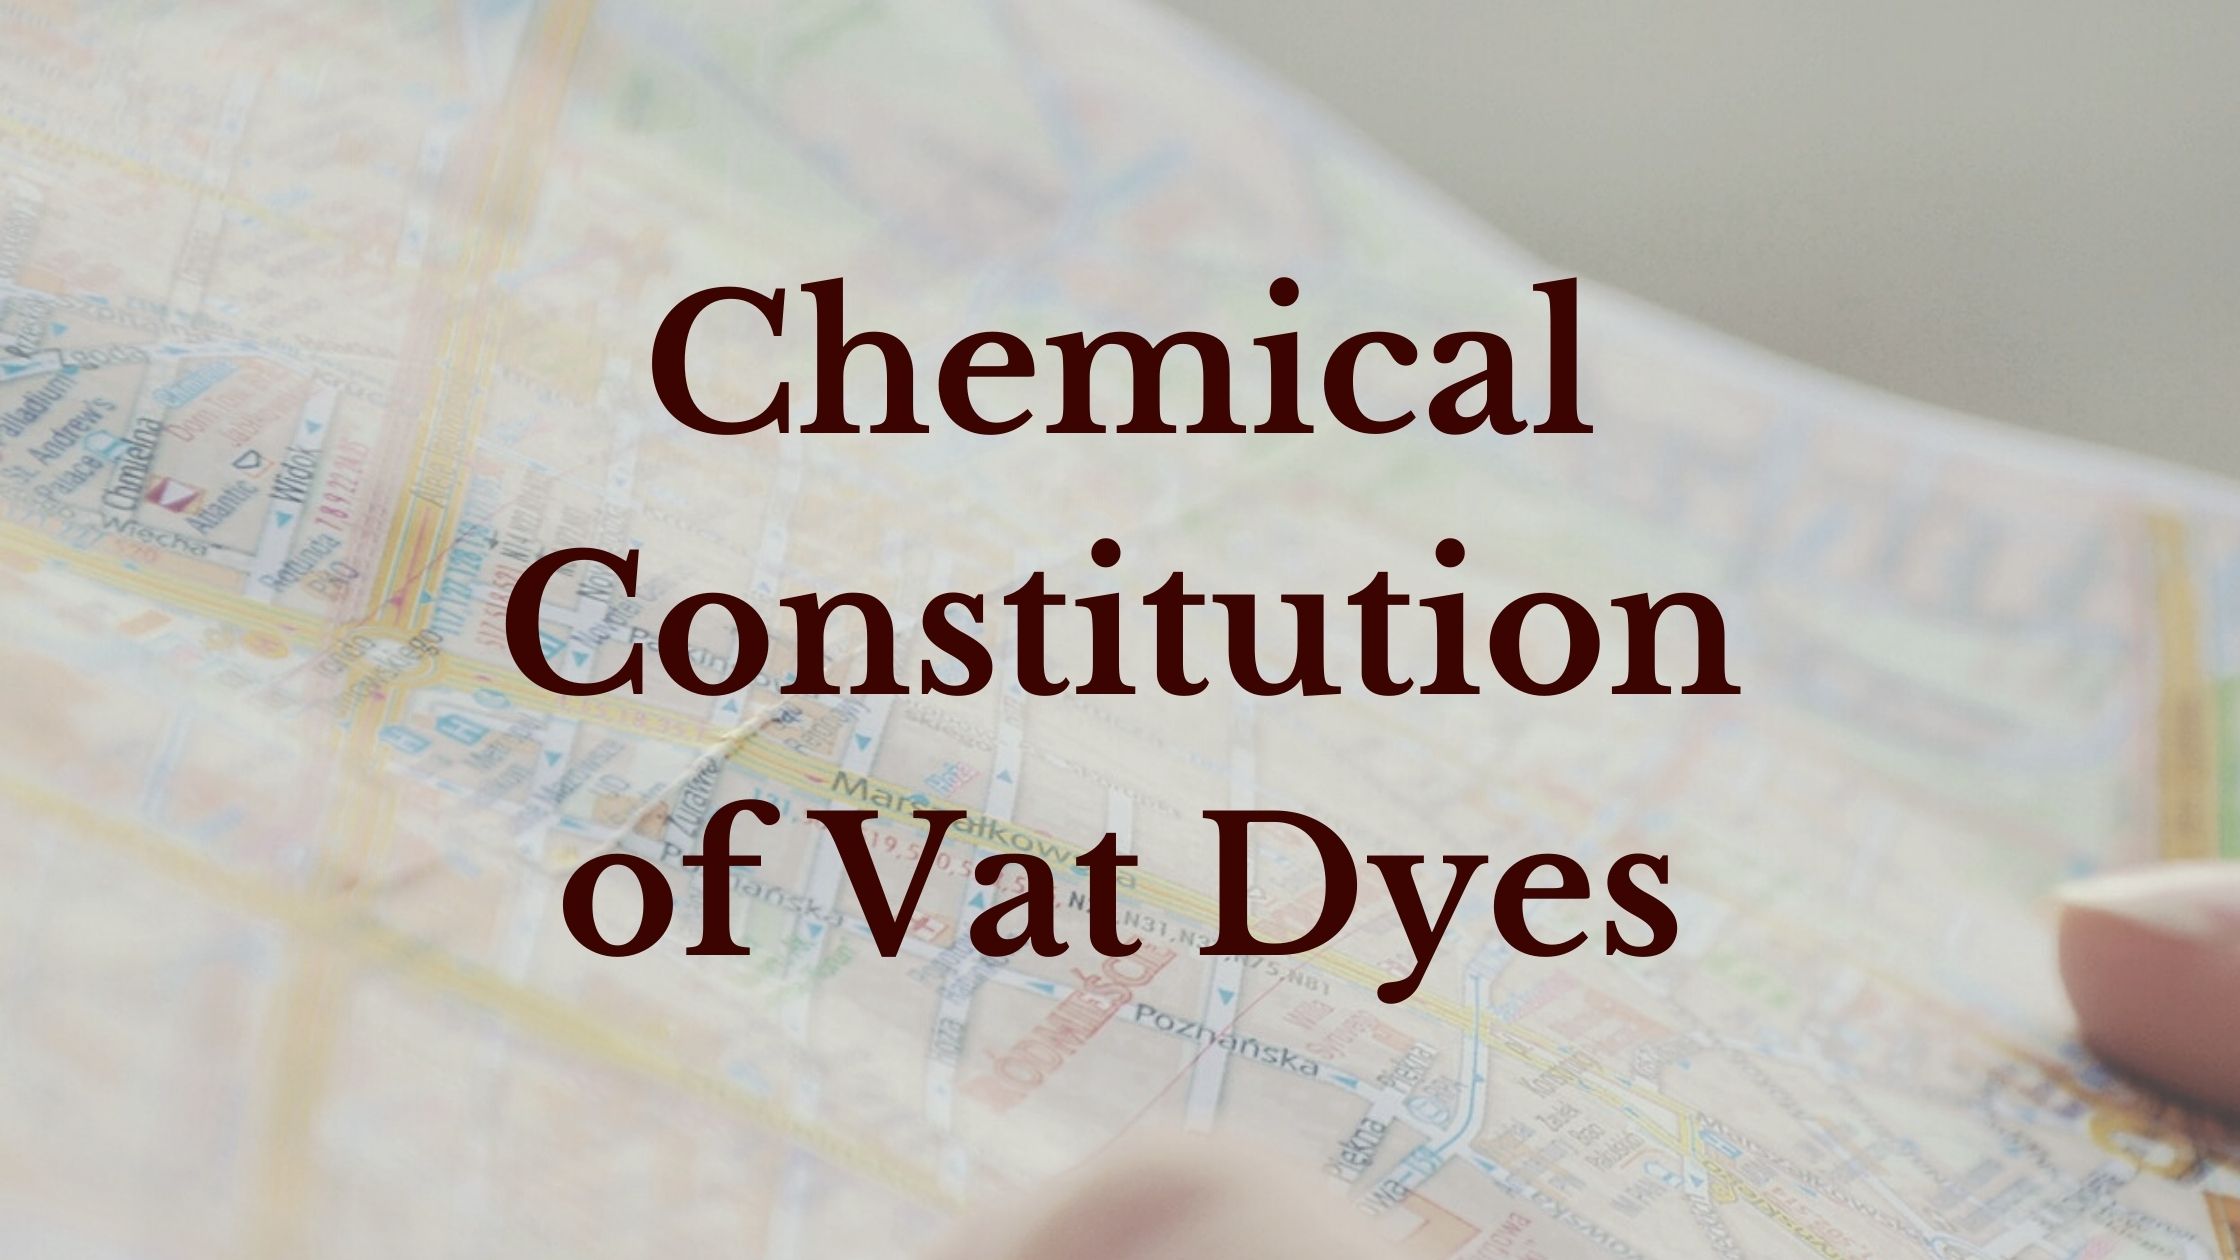 Chemical Constitution of Vat Dyes